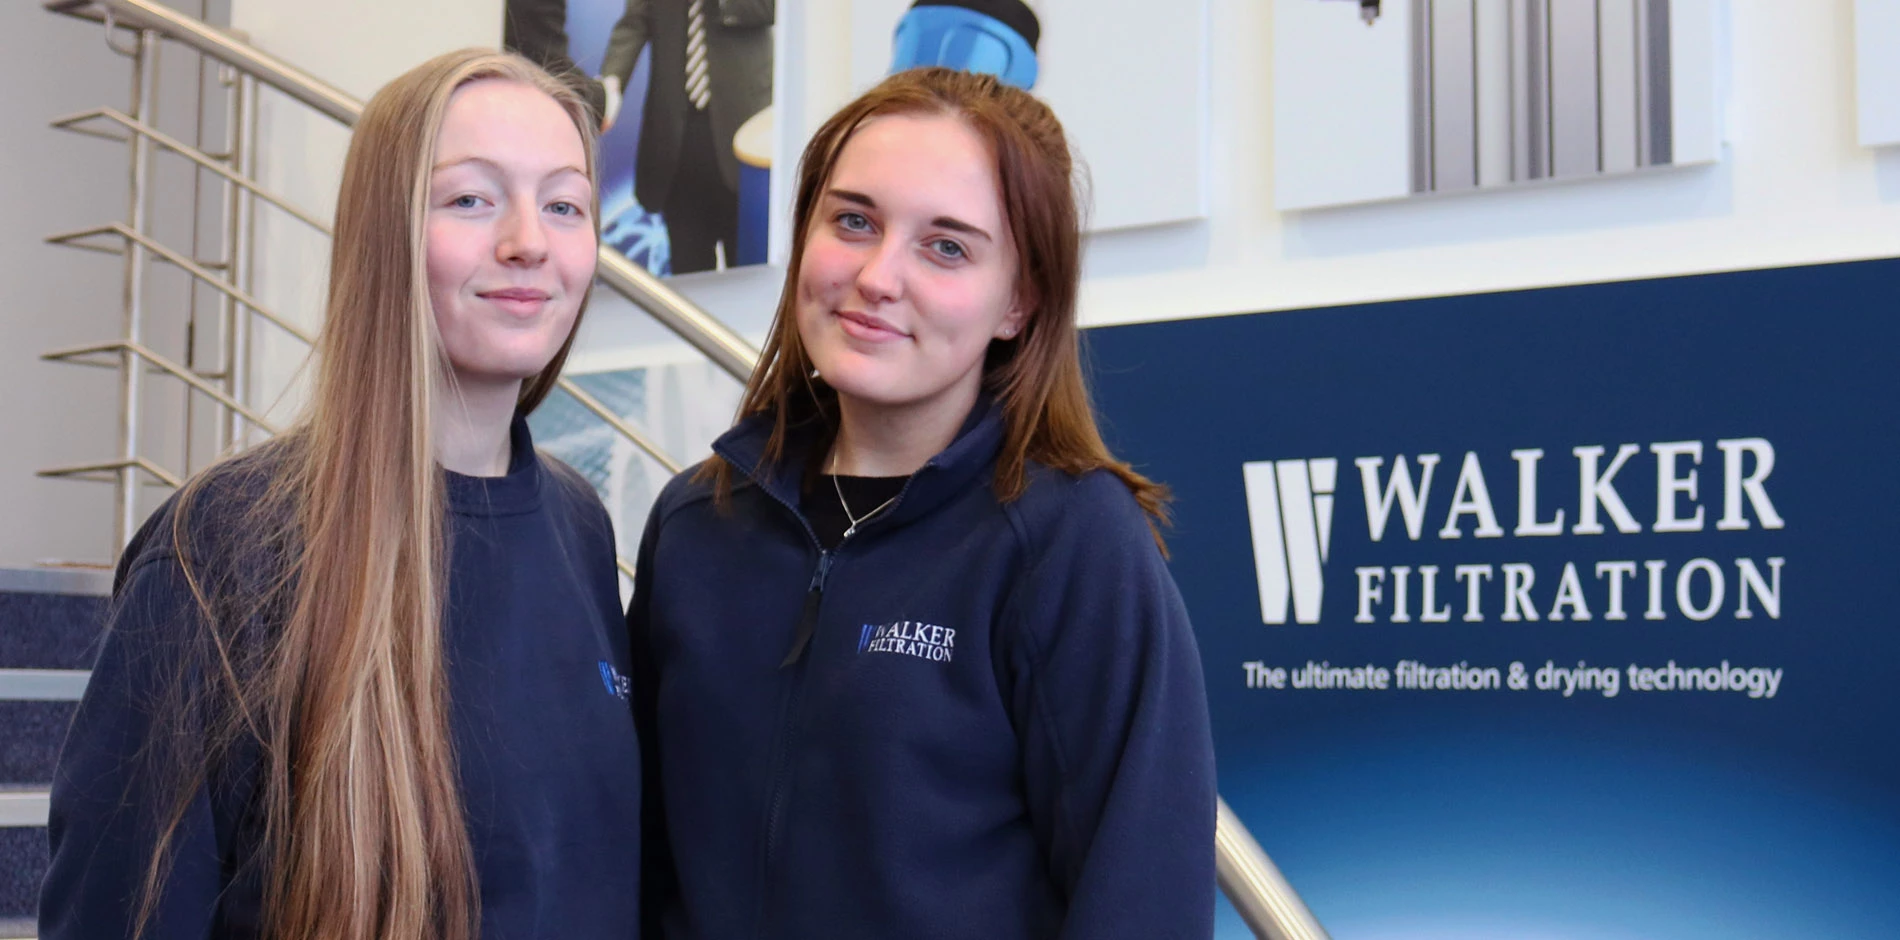 Morgan Pearce and Holly Charlton-Rowell are undergoing apprenticeships at Walker Filtration